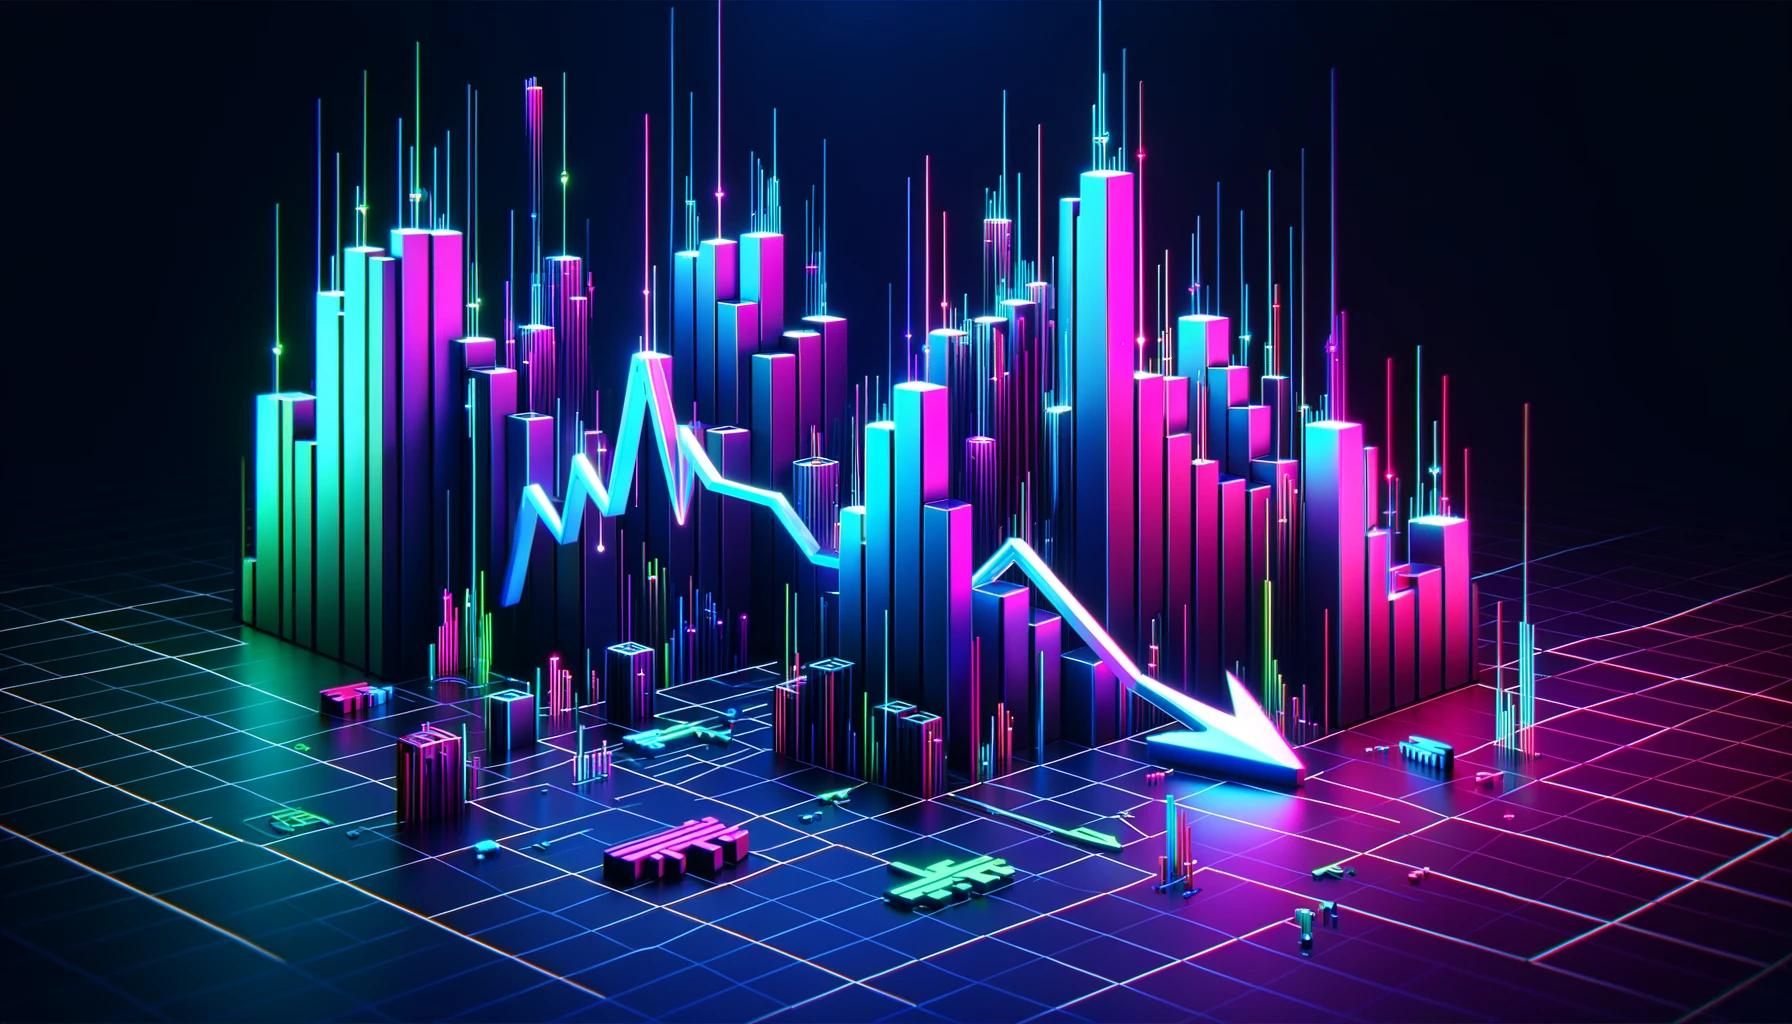 floor-prices-of-top-nft-collections-crash-as-cryptocurrencies-rally